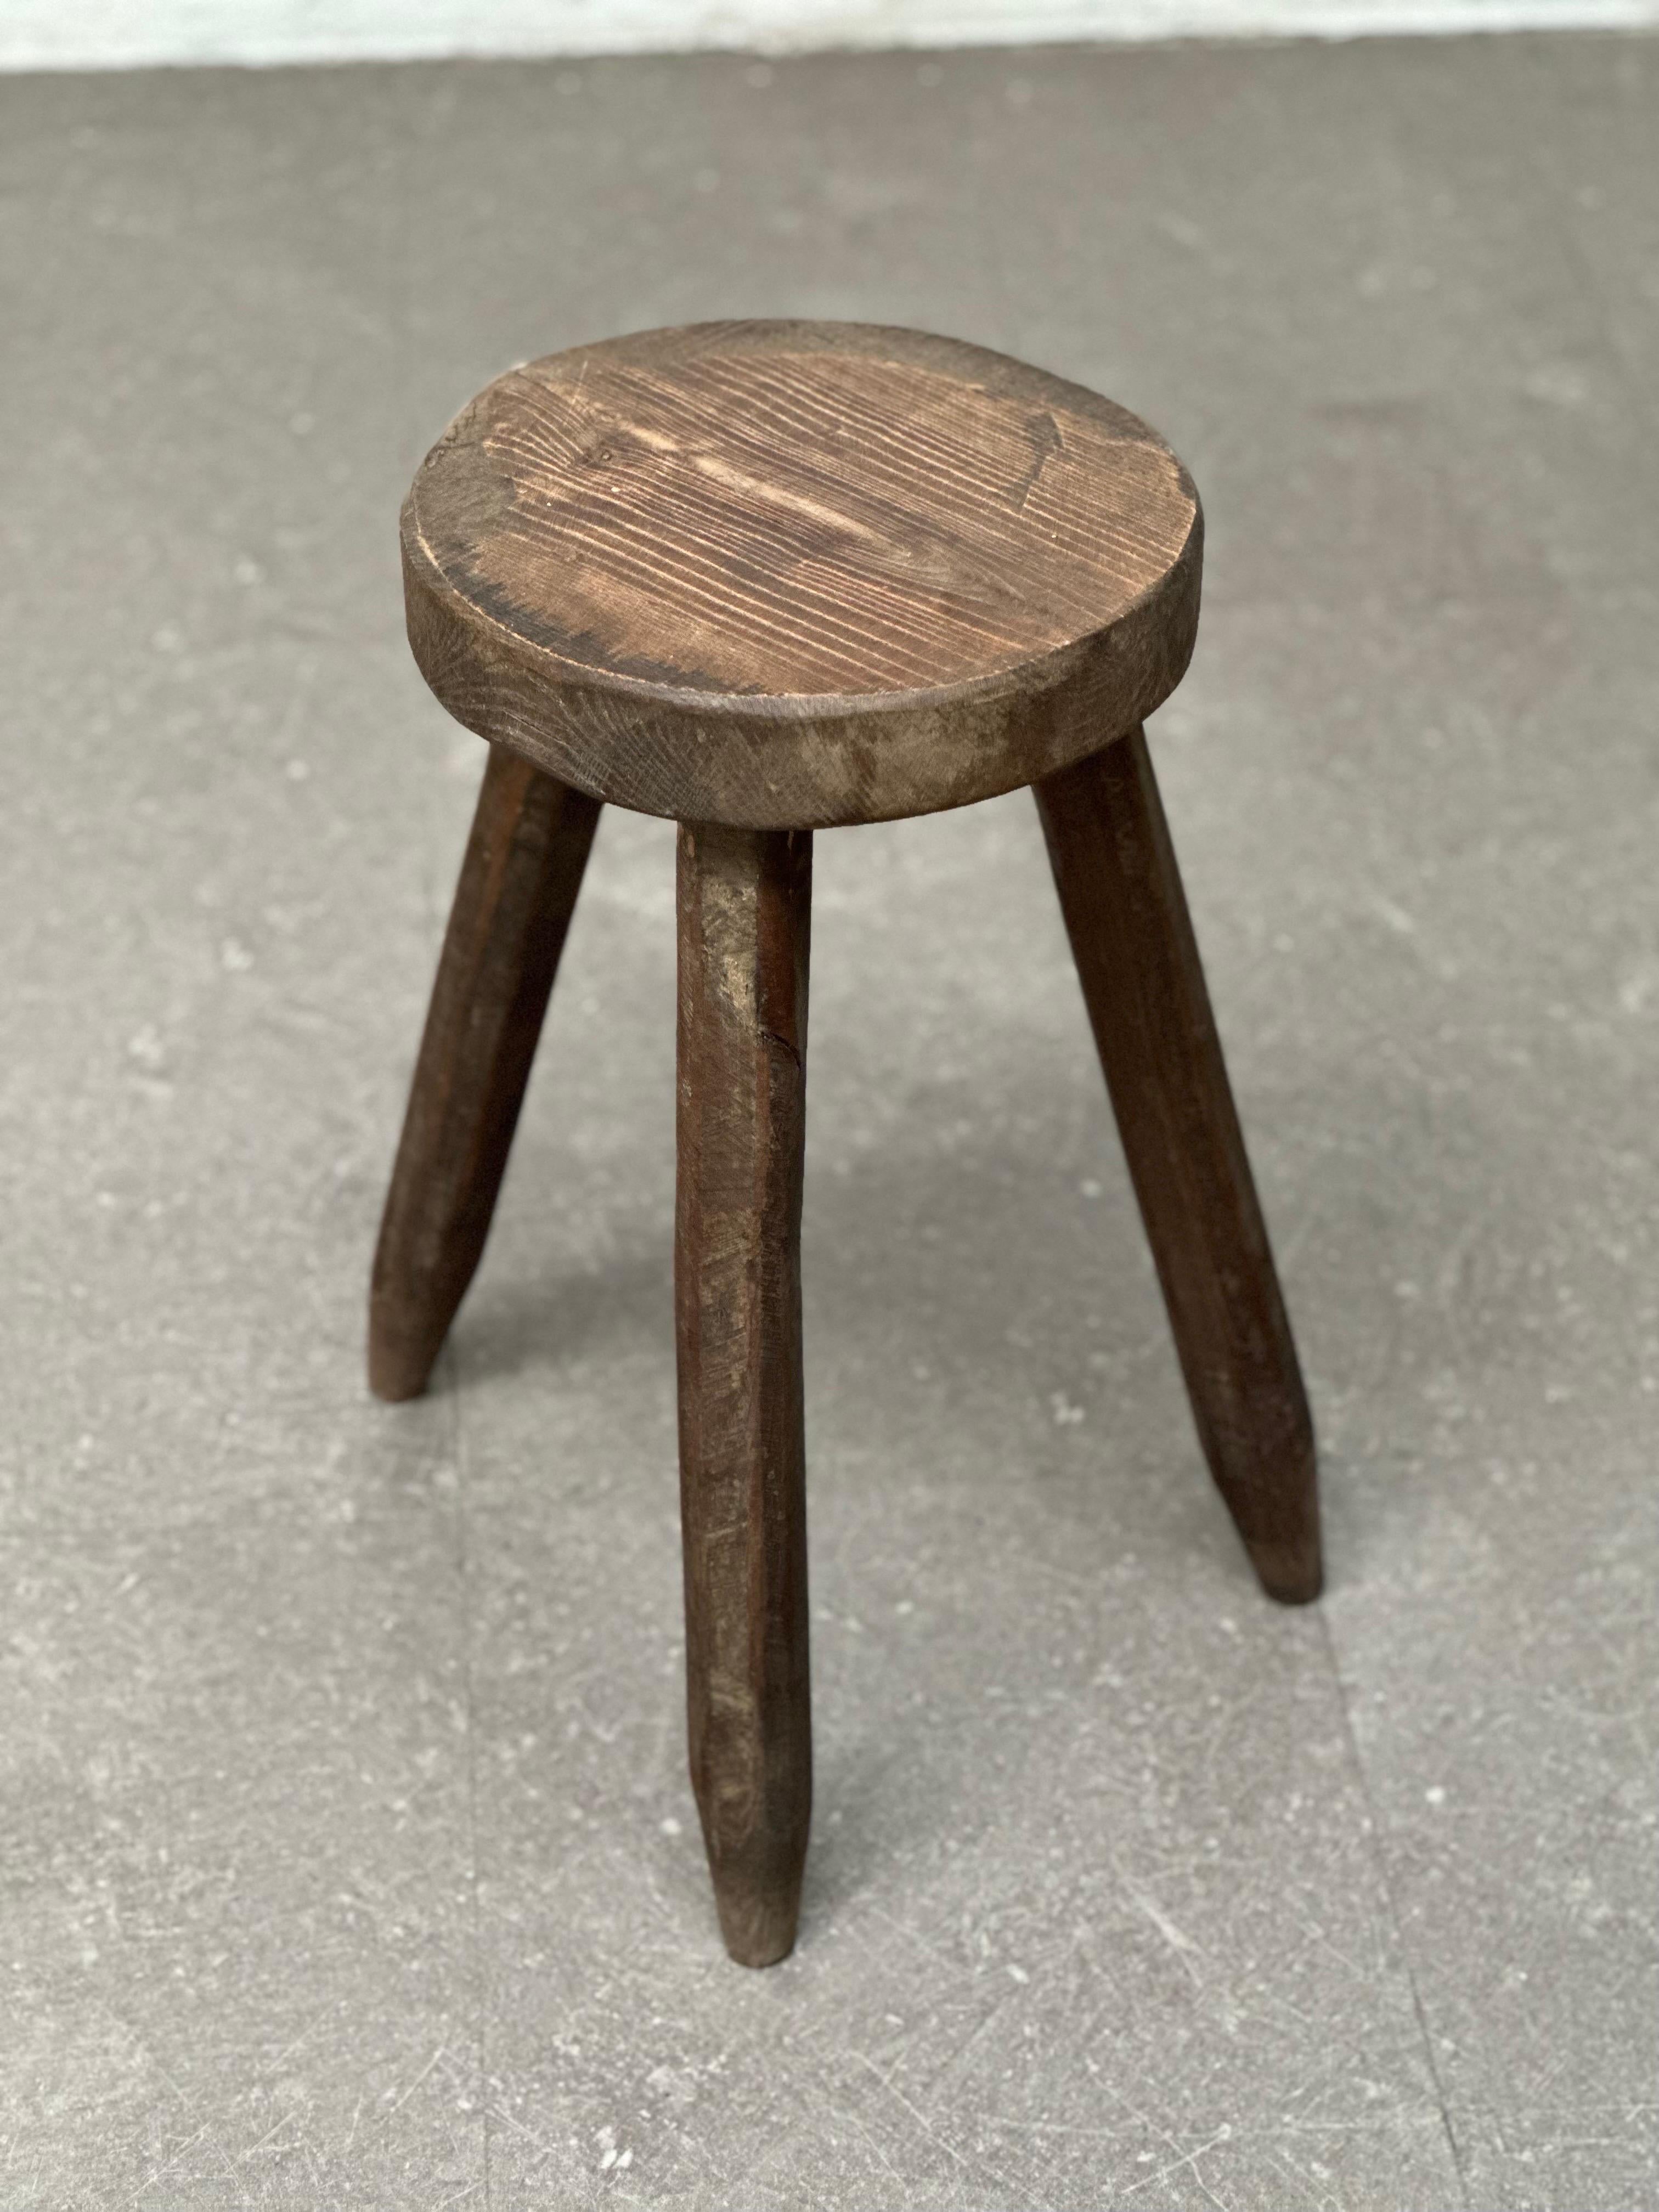 Hand-Carved French Brutalist Tripod Stool, 1960s - Embrace the Charm of Primitive Elegance For Sale